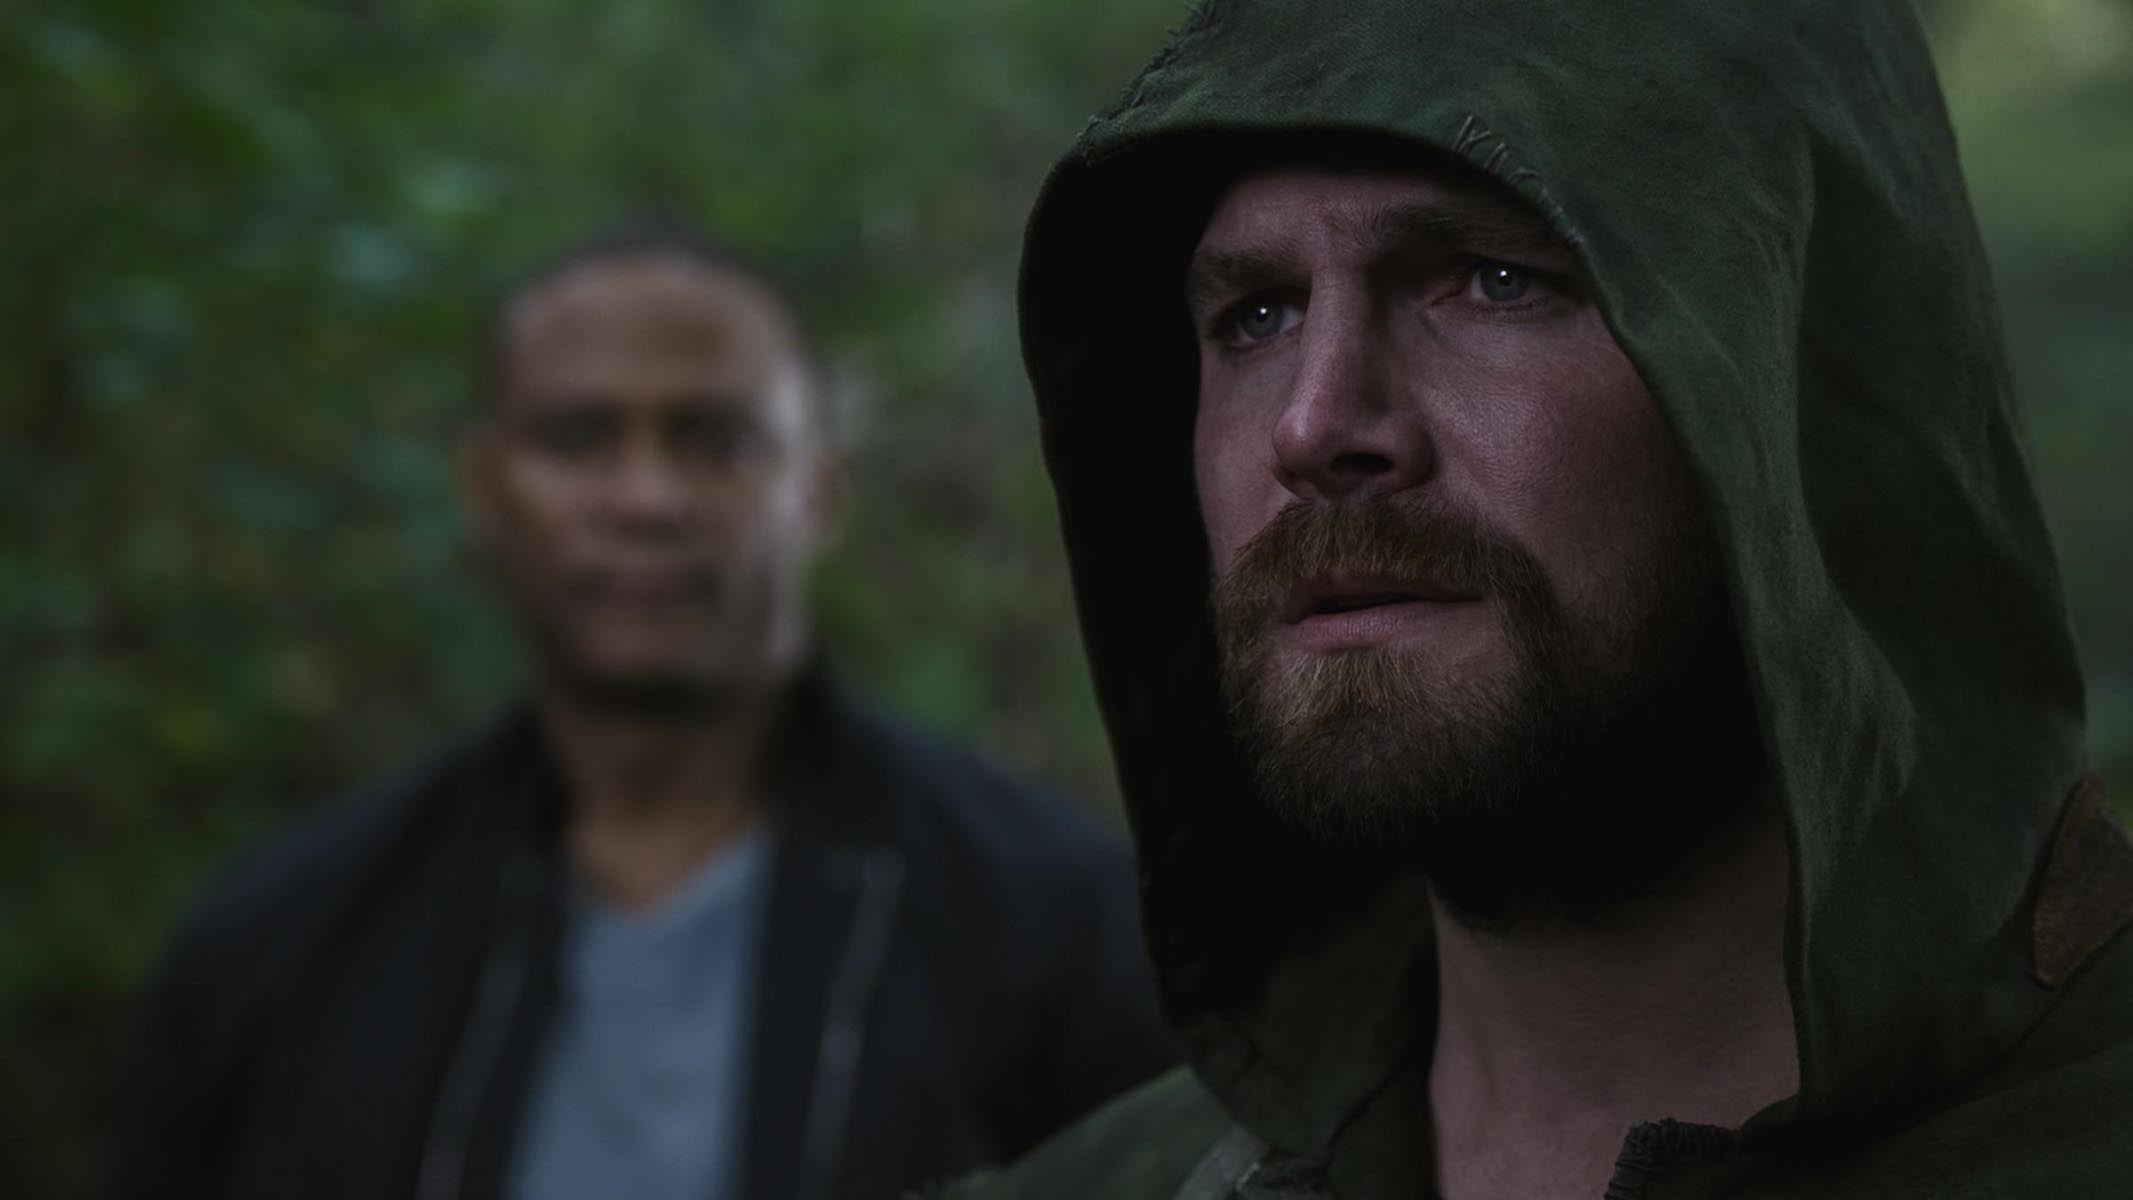 David Ramsey as John Diggle/Spartan and Stephen Amell as Oliver Queen/Green Arrow